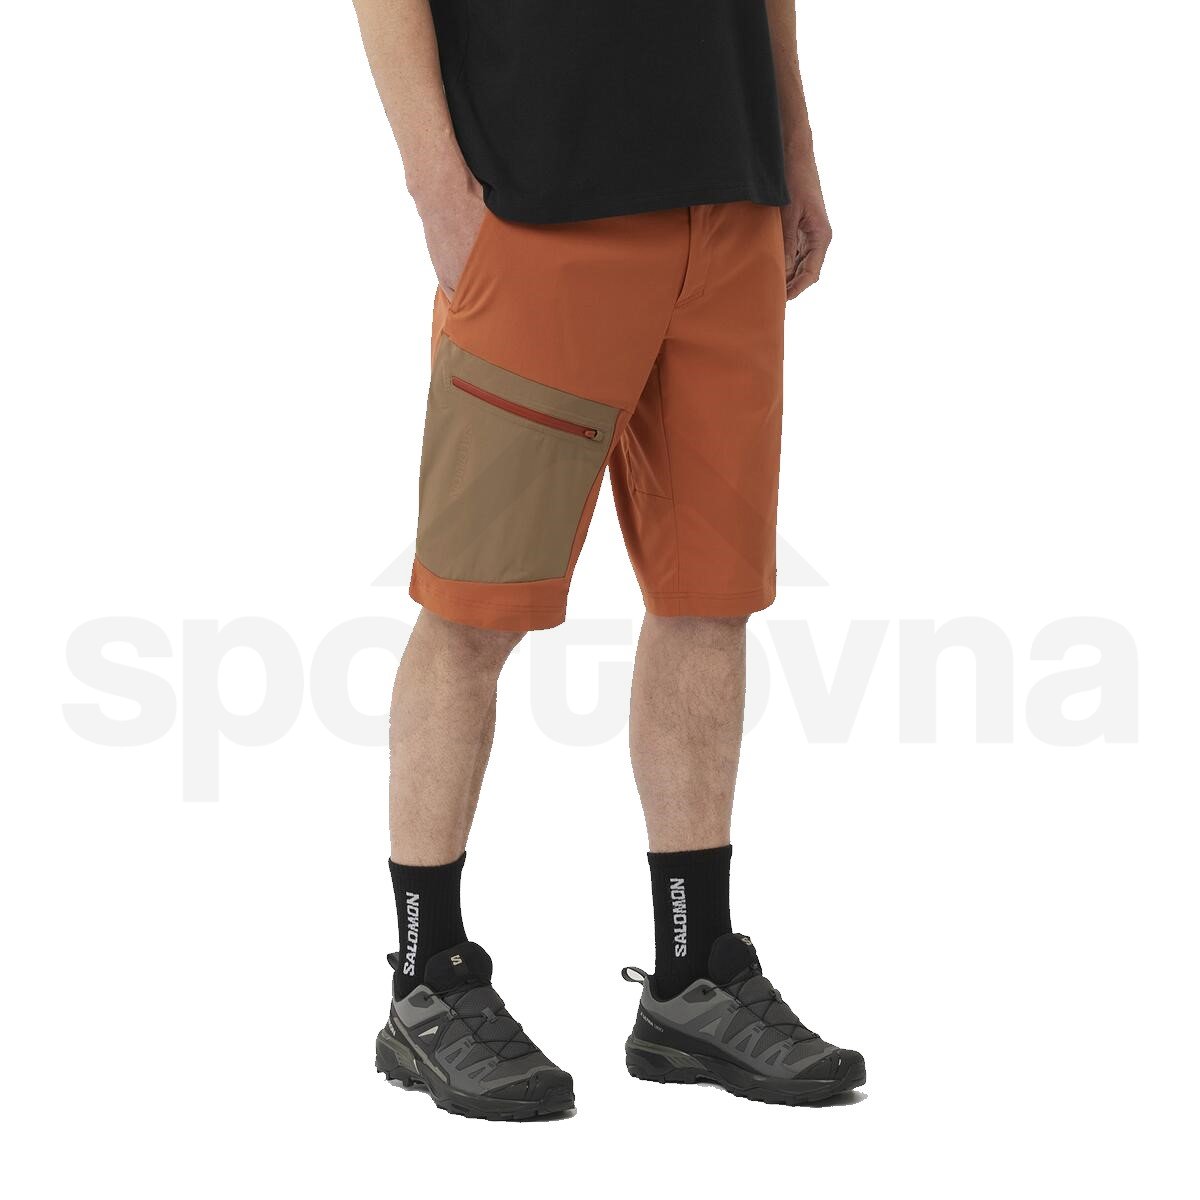 LC2212500_0_MOD_outerpathutilityshorts_bakedclay_outdoor_m.png.cq5dam.web.1200.1200